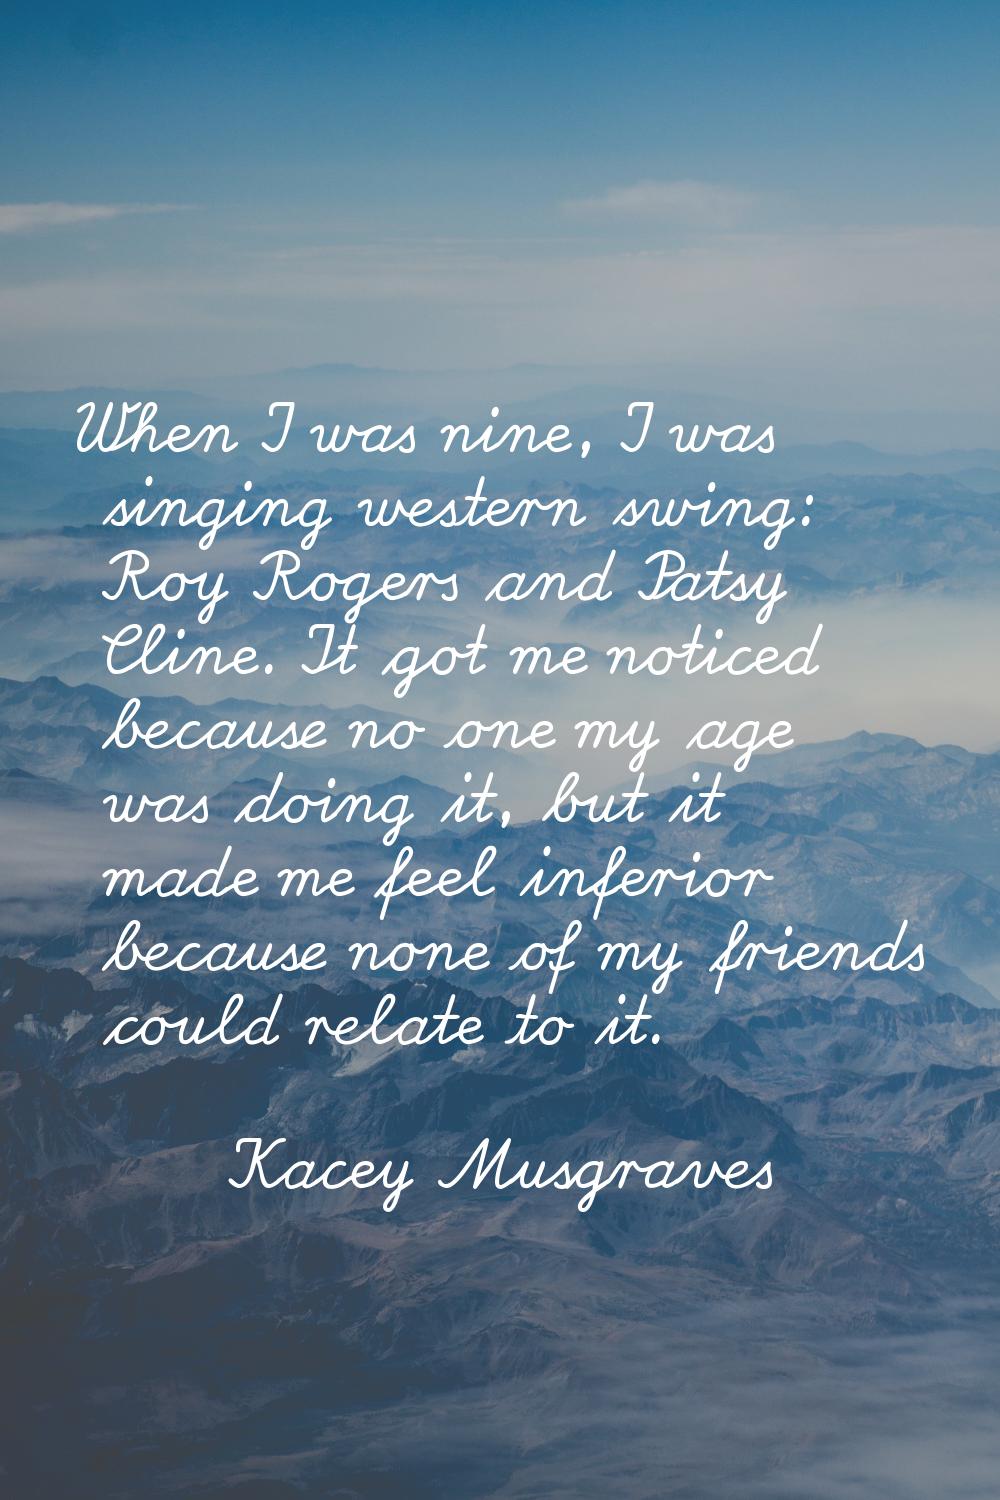 When I was nine, I was singing western swing: Roy Rogers and Patsy Cline. It got me noticed because